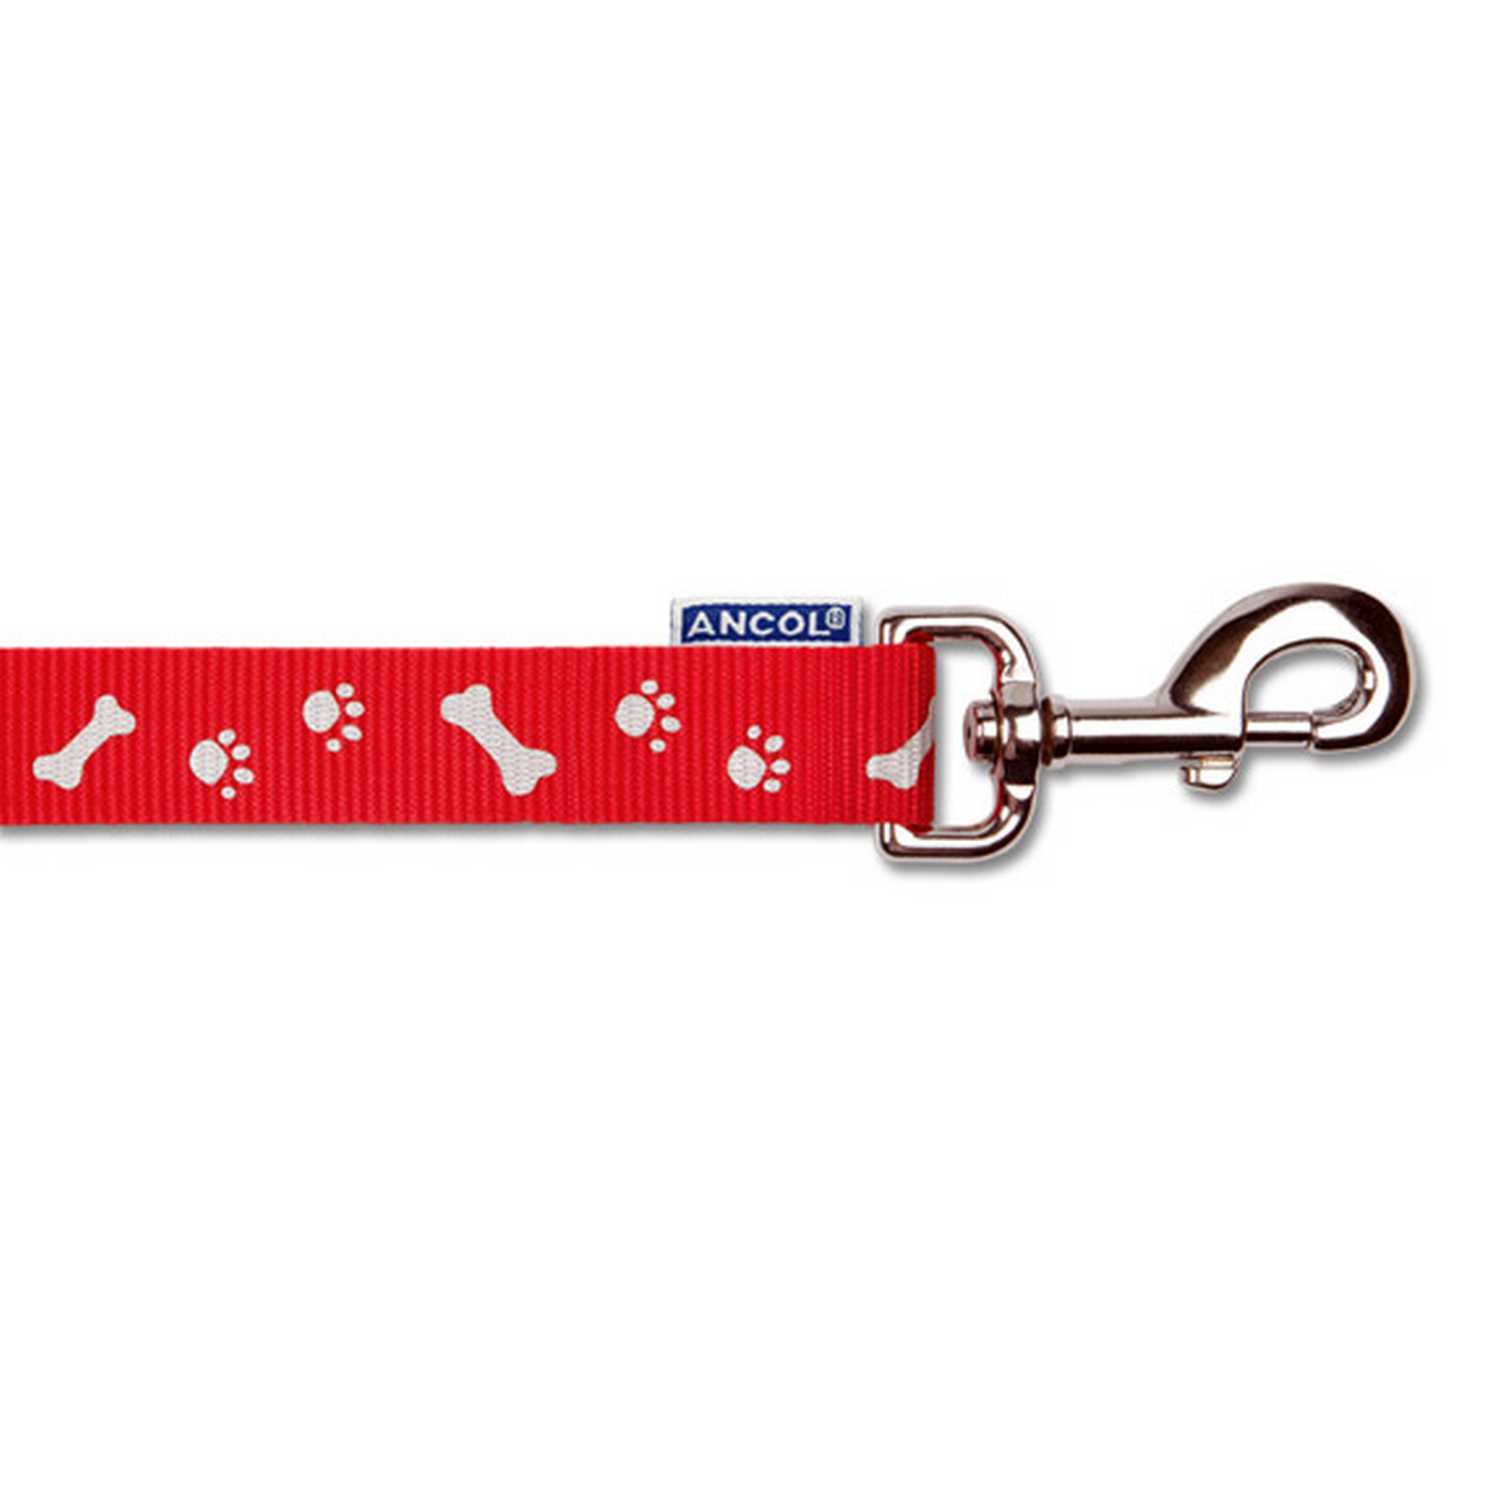 Ancol Reflective Stars Dog Lead 1m - Red Image 1